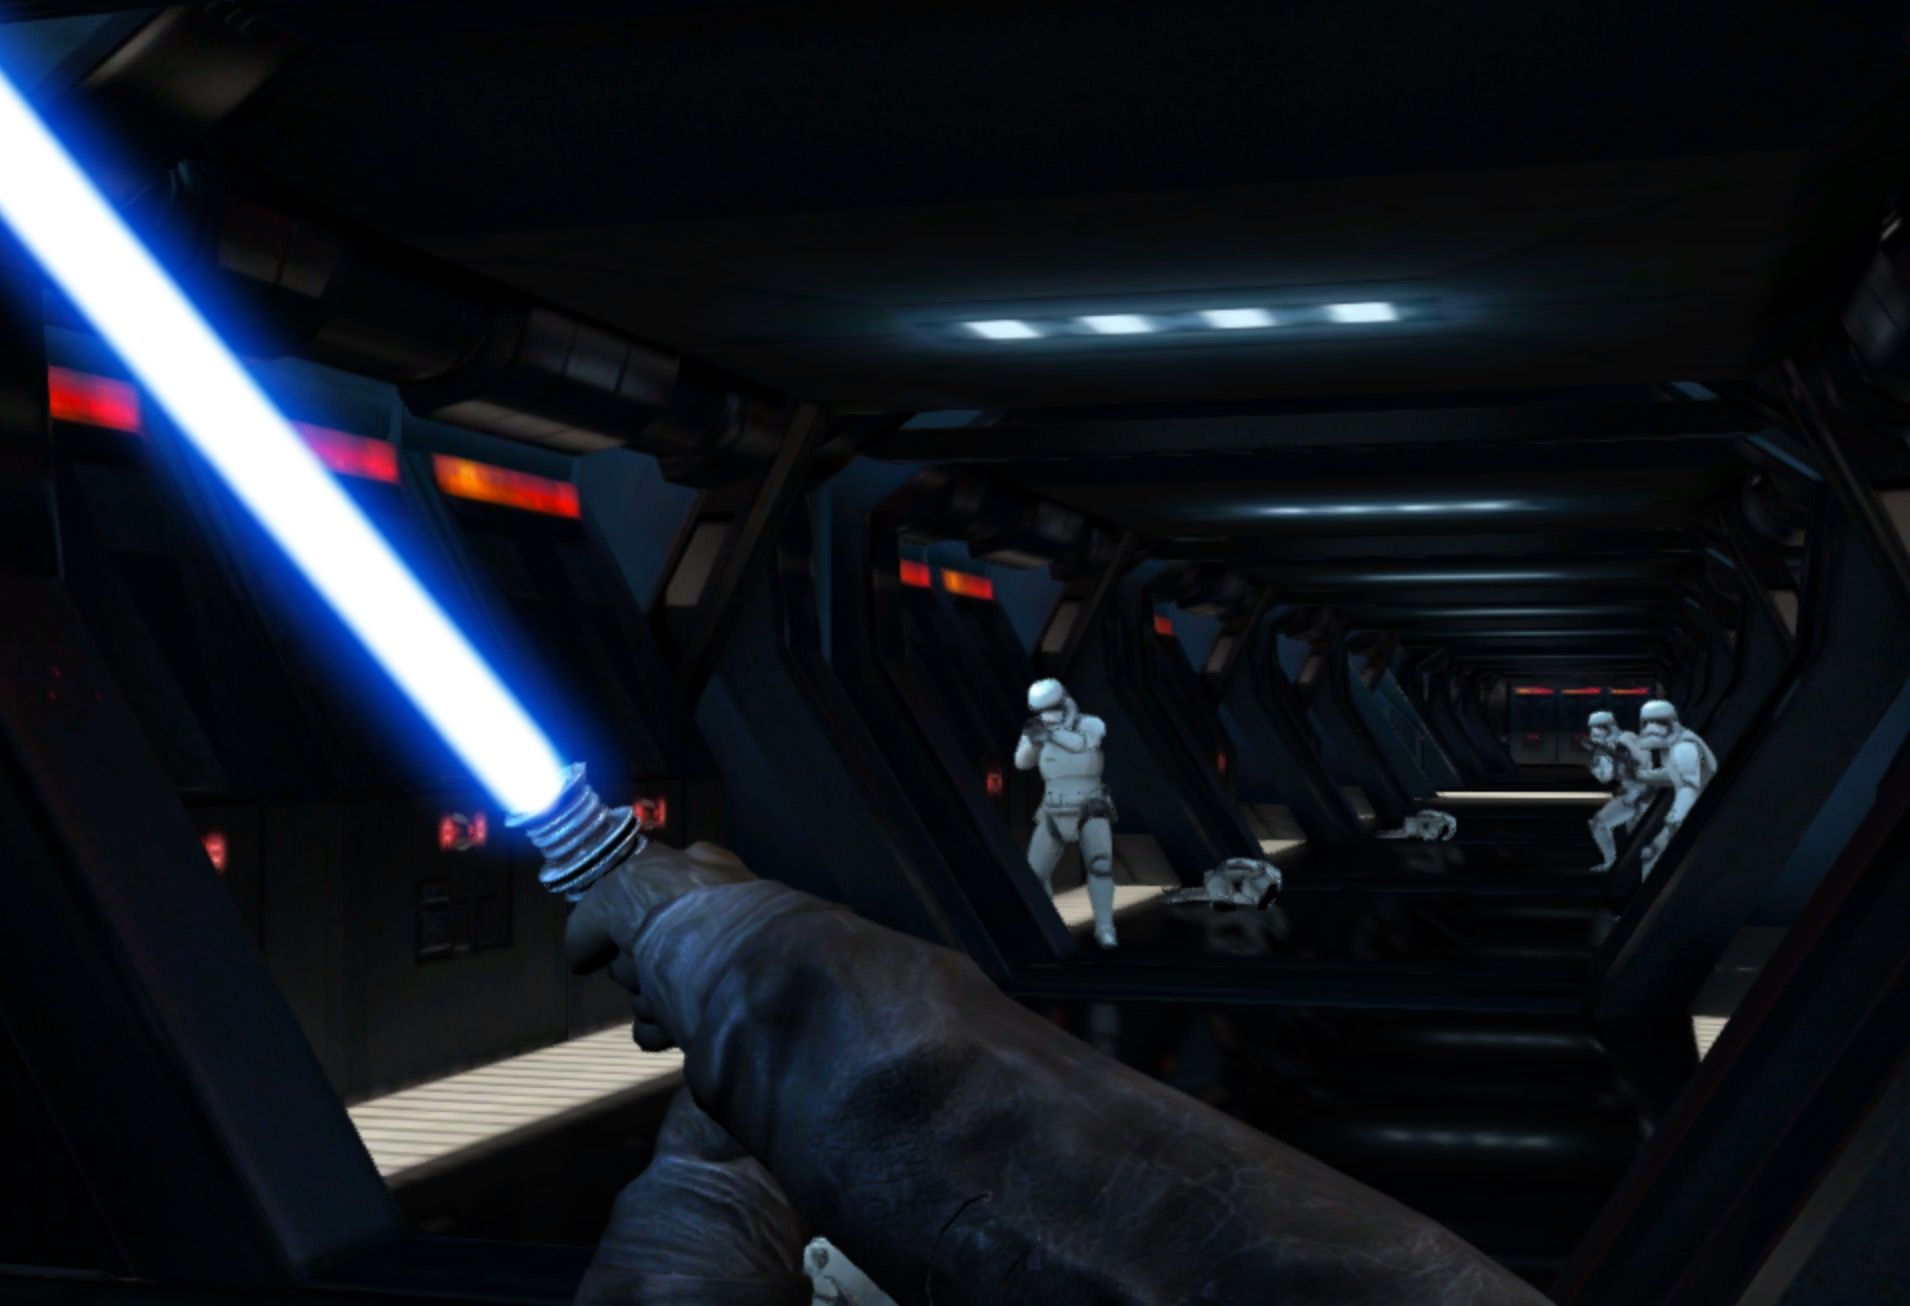 fight stormtroopers in this google game that turns your phone into a lightsaber image 1